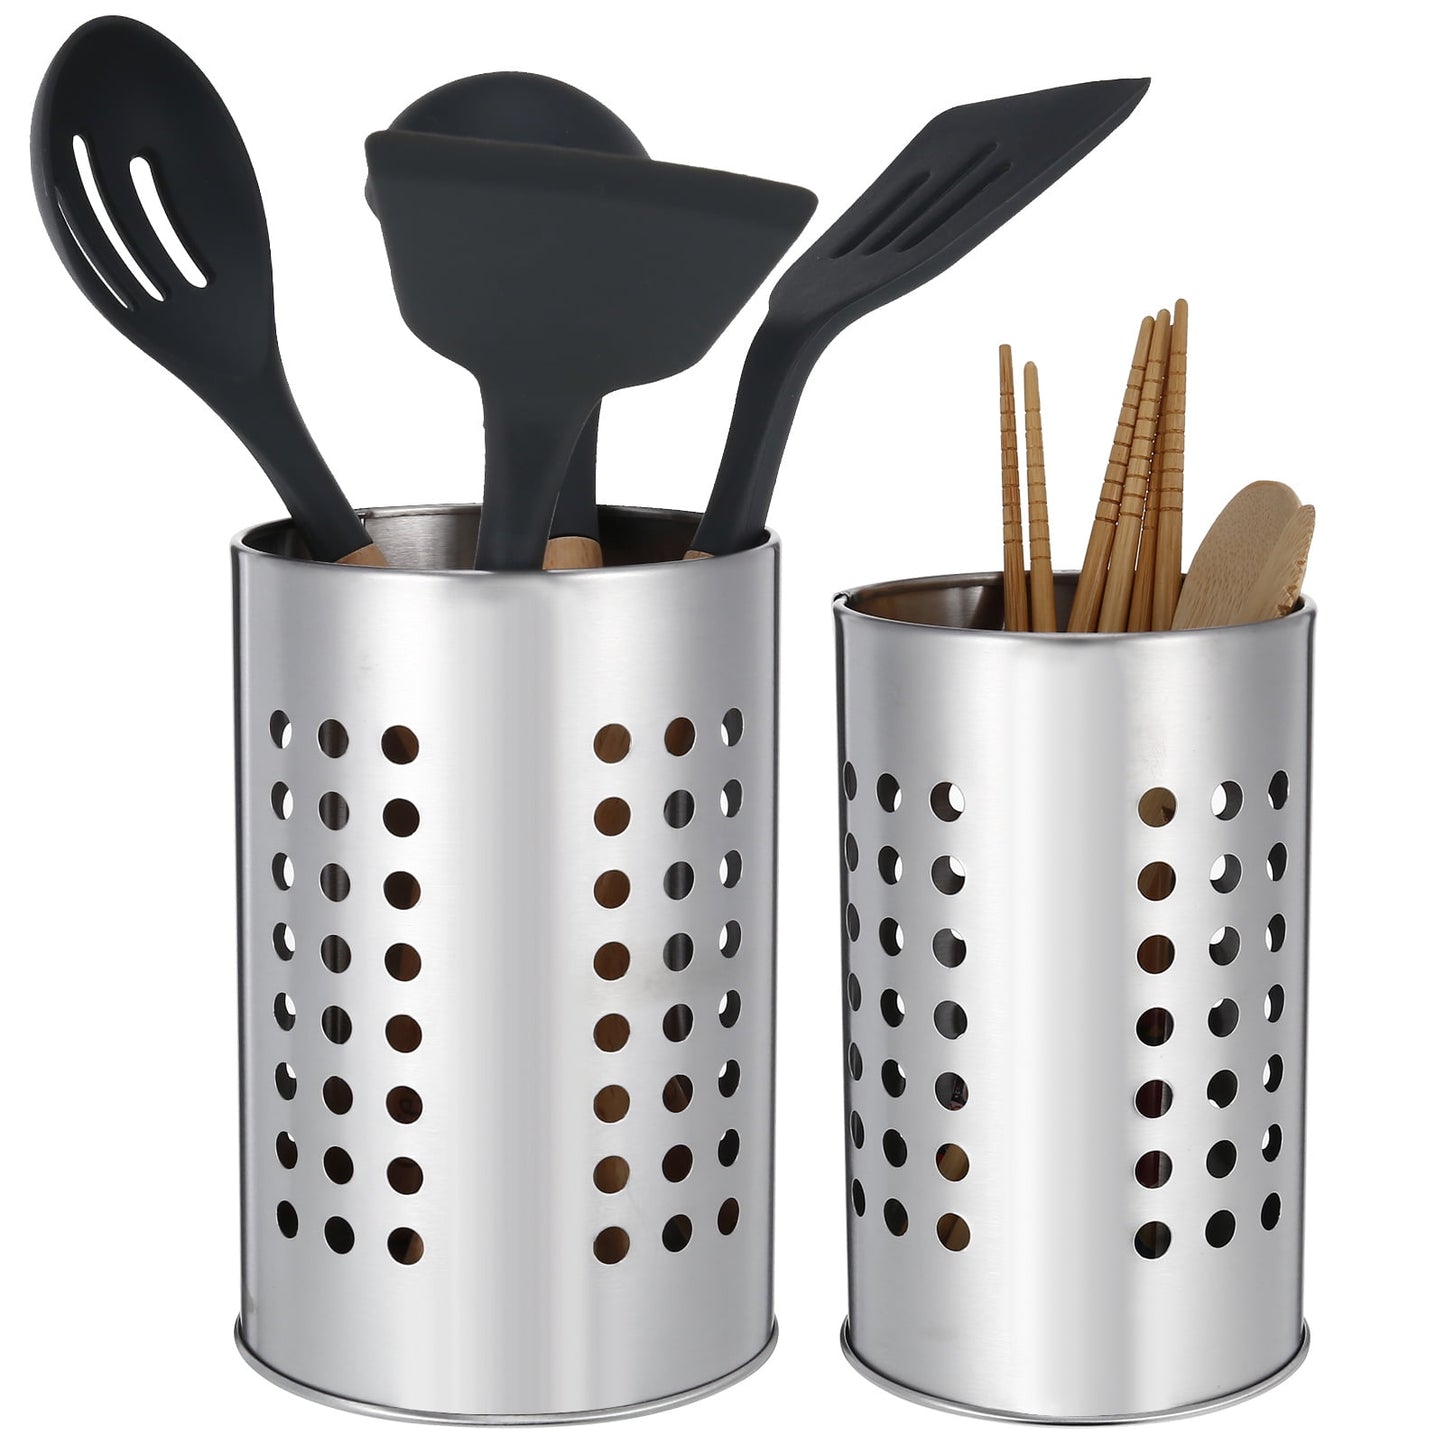 Taihexin 2 Pcs Stainless Steel Cooking Utensil Holder, Kitchen Utensil Drying Cylinder, Spoon Holder, Cooking Utensil Organizer for All Kitchens